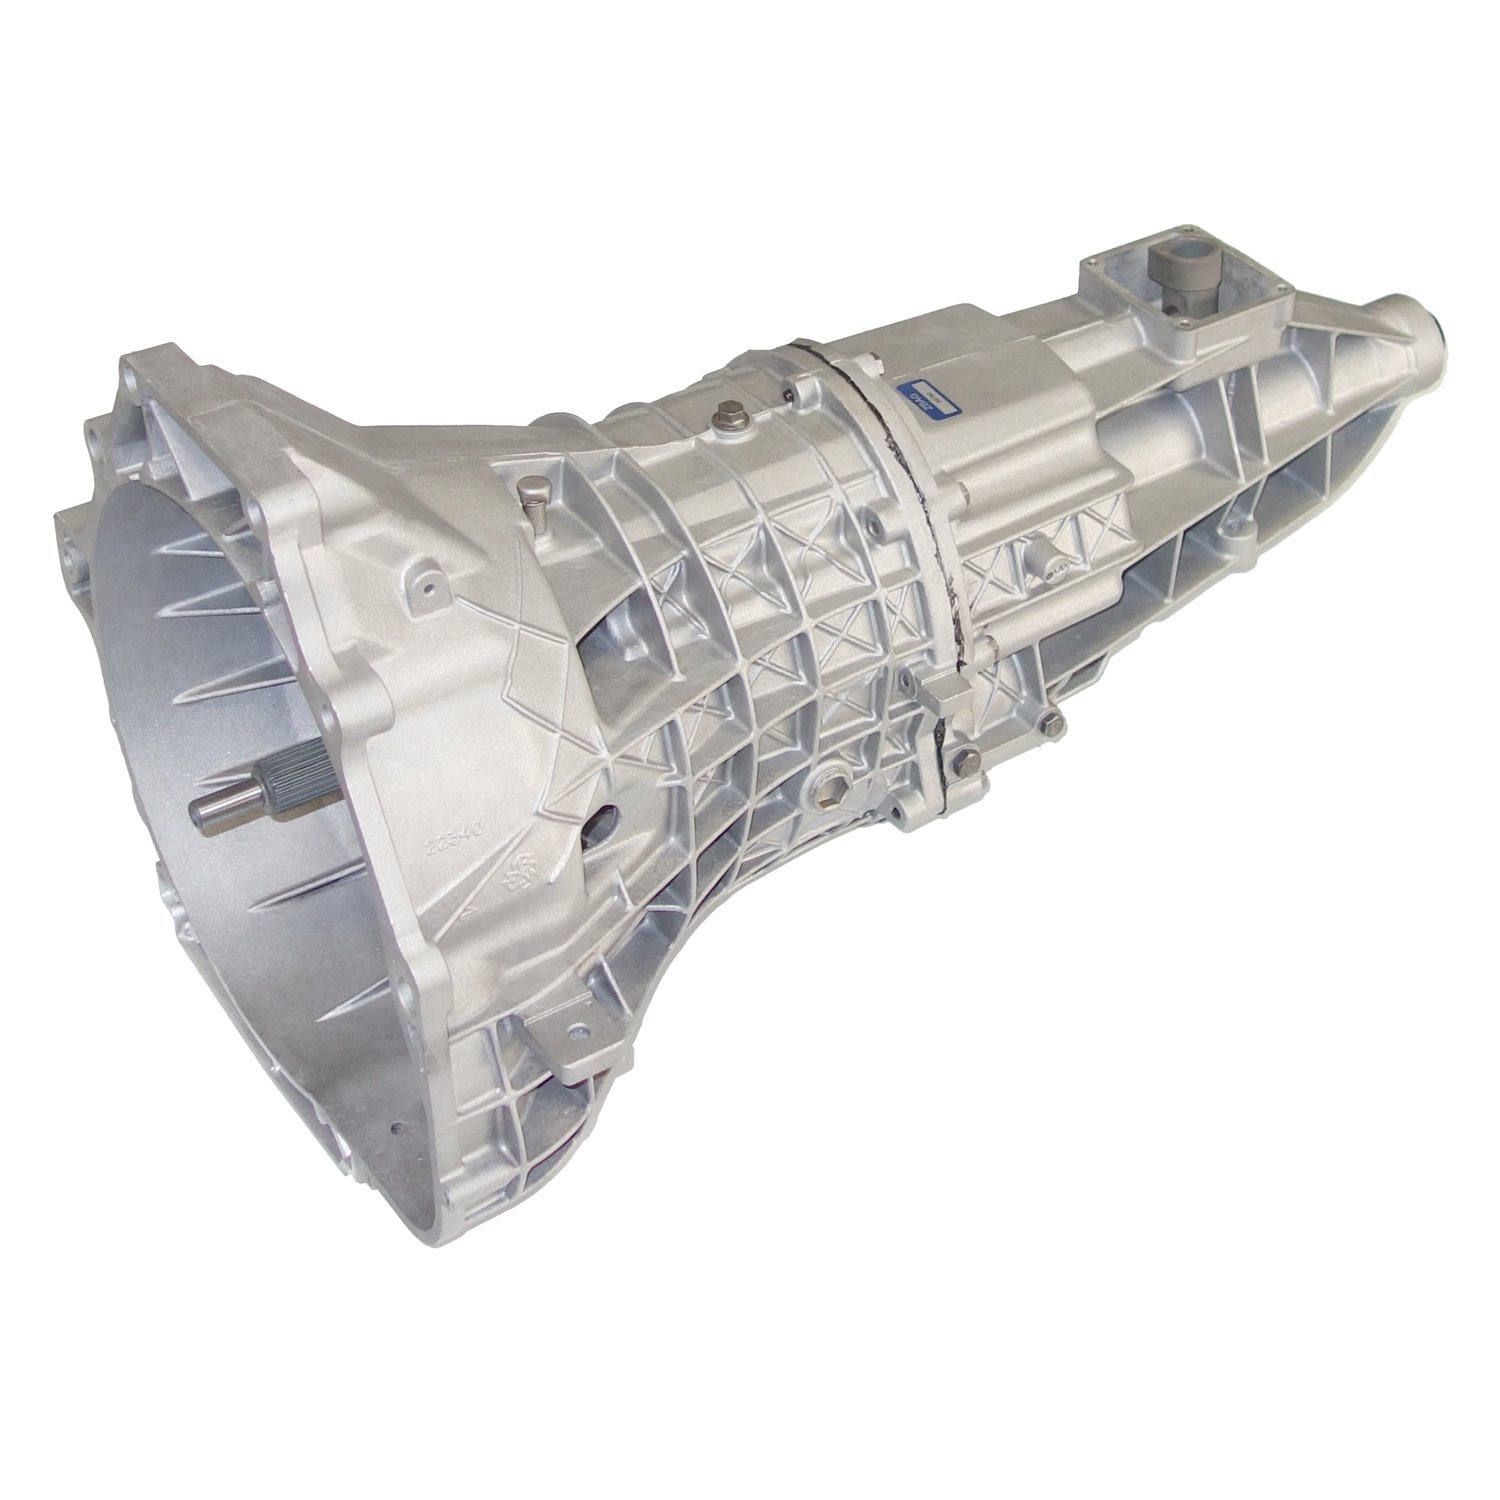 Remanufactured NV1500 Manual Transmission for Jeep 02-04 Liberty, 2WD, 5 Speed